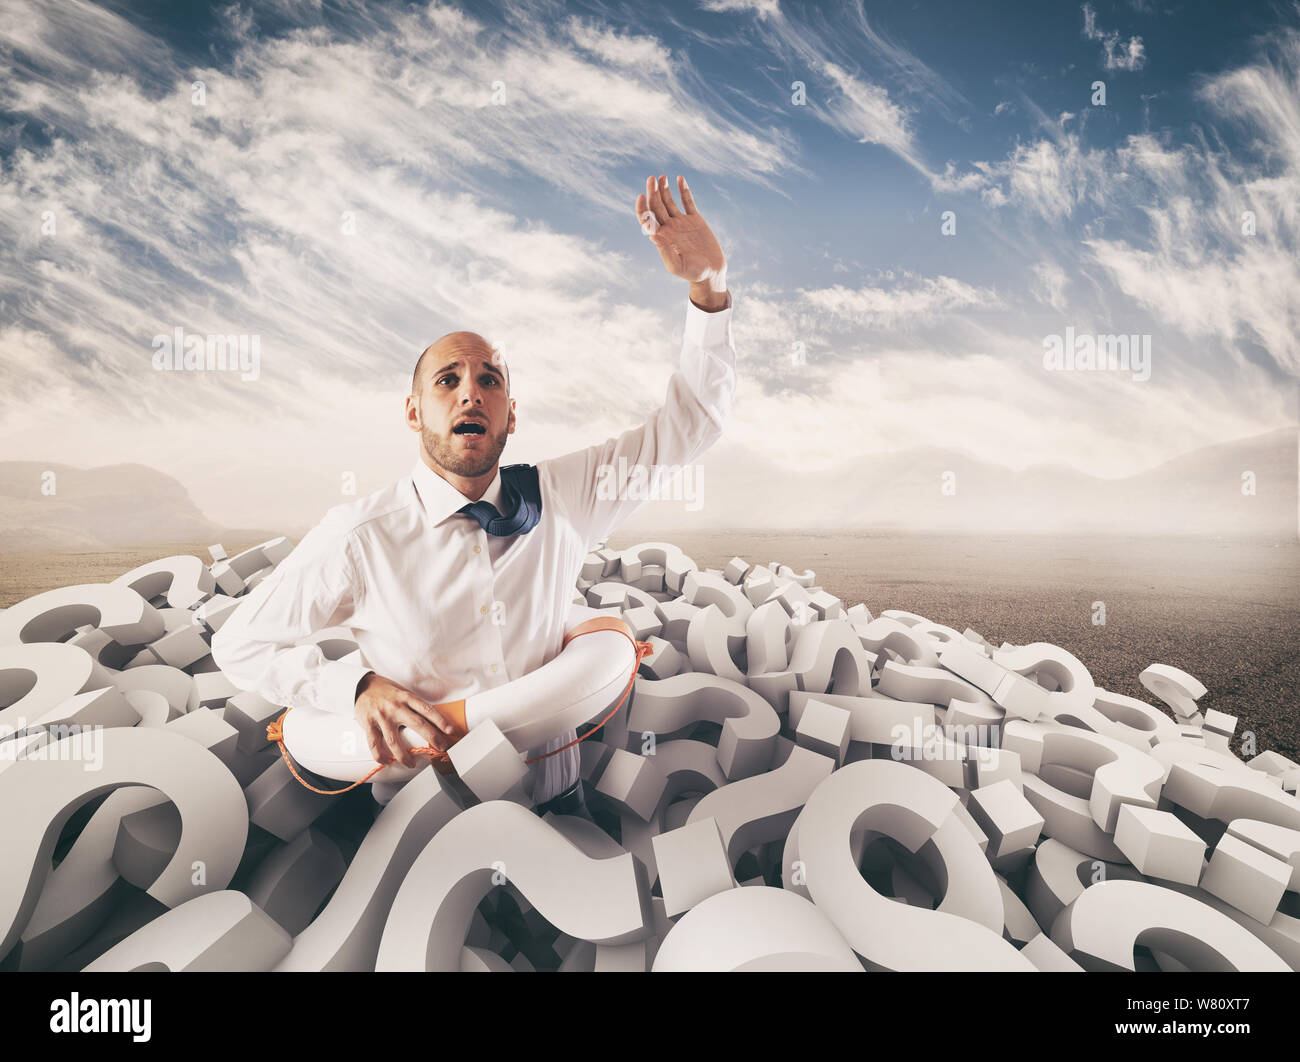 Man asks for help submerged by question marks. 3D Rendering Stock Photo